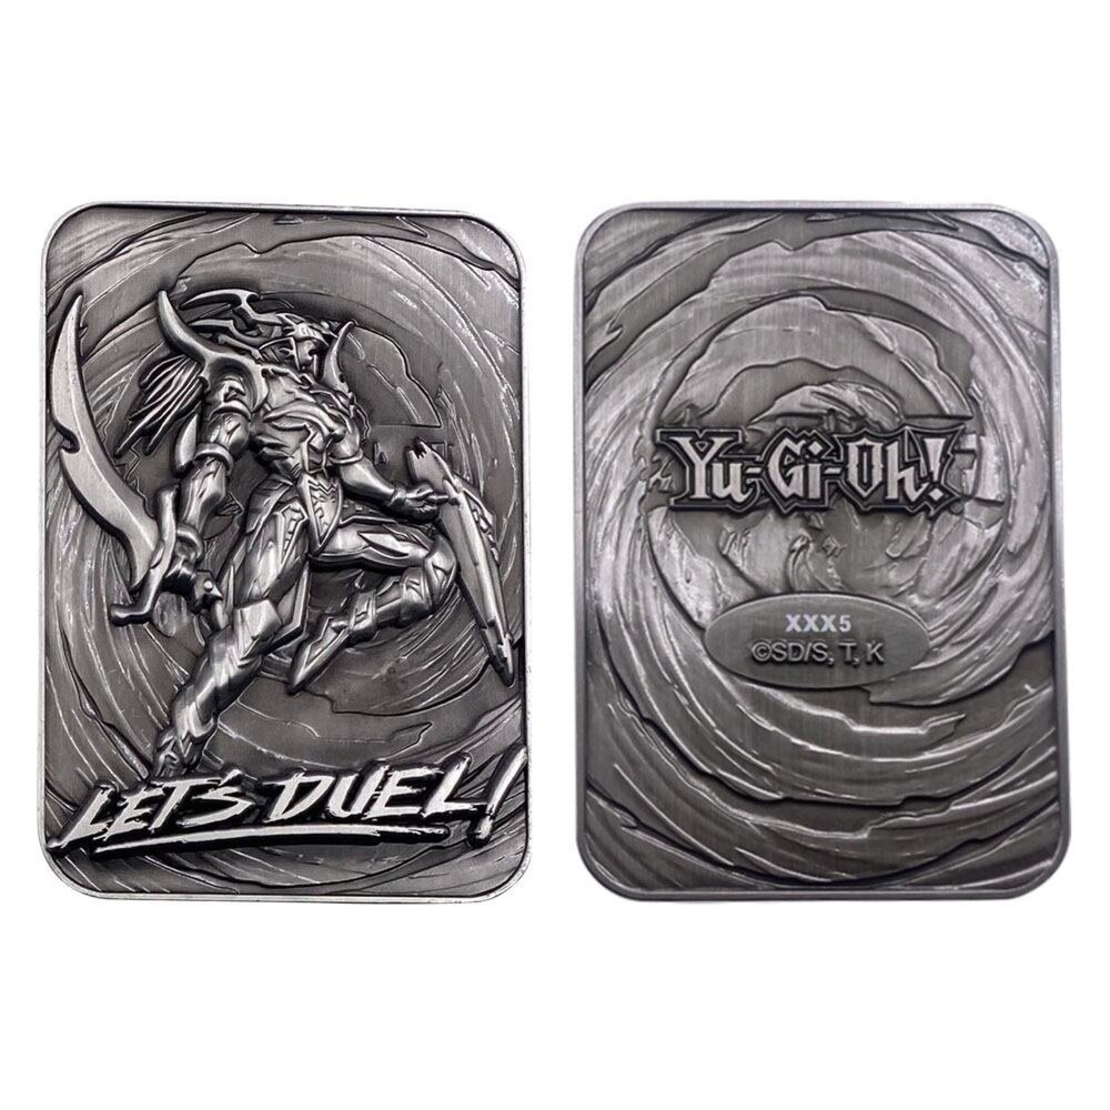 Yu-Gi-Oh!  Black Luster Soldier Limited Edition метална карта